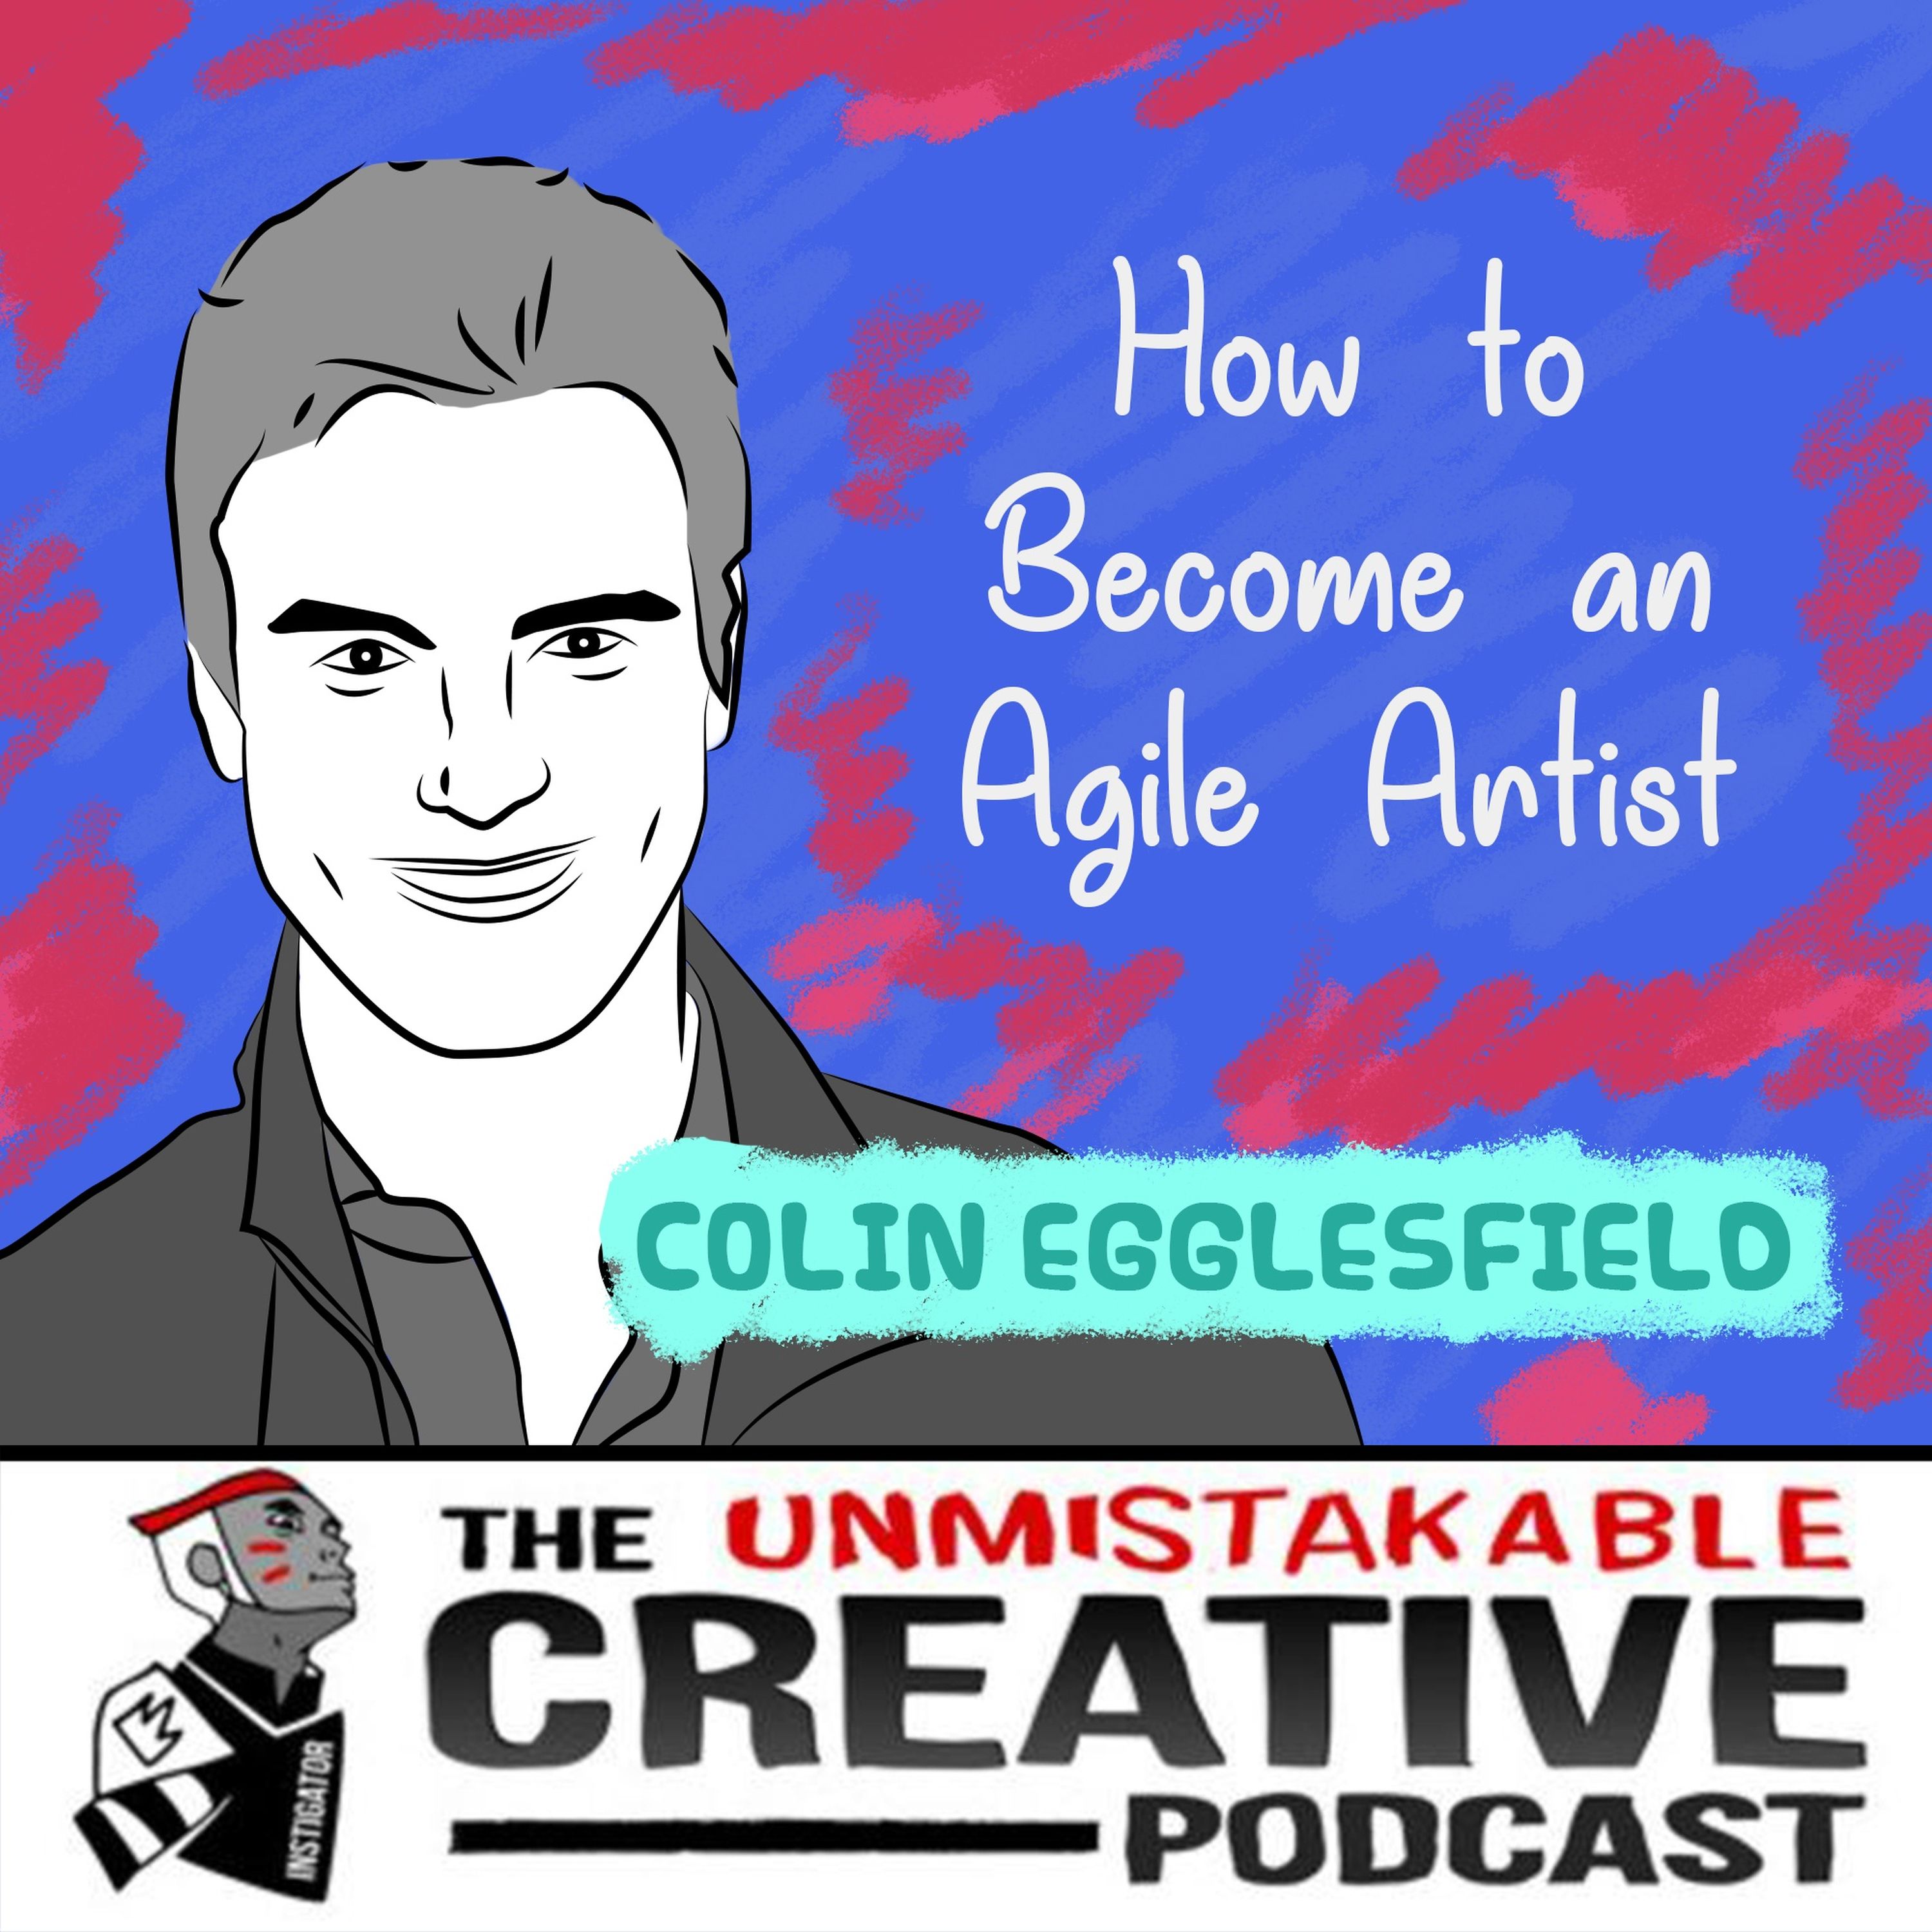 How to Become an Agile Artist with Colin Egglesfield